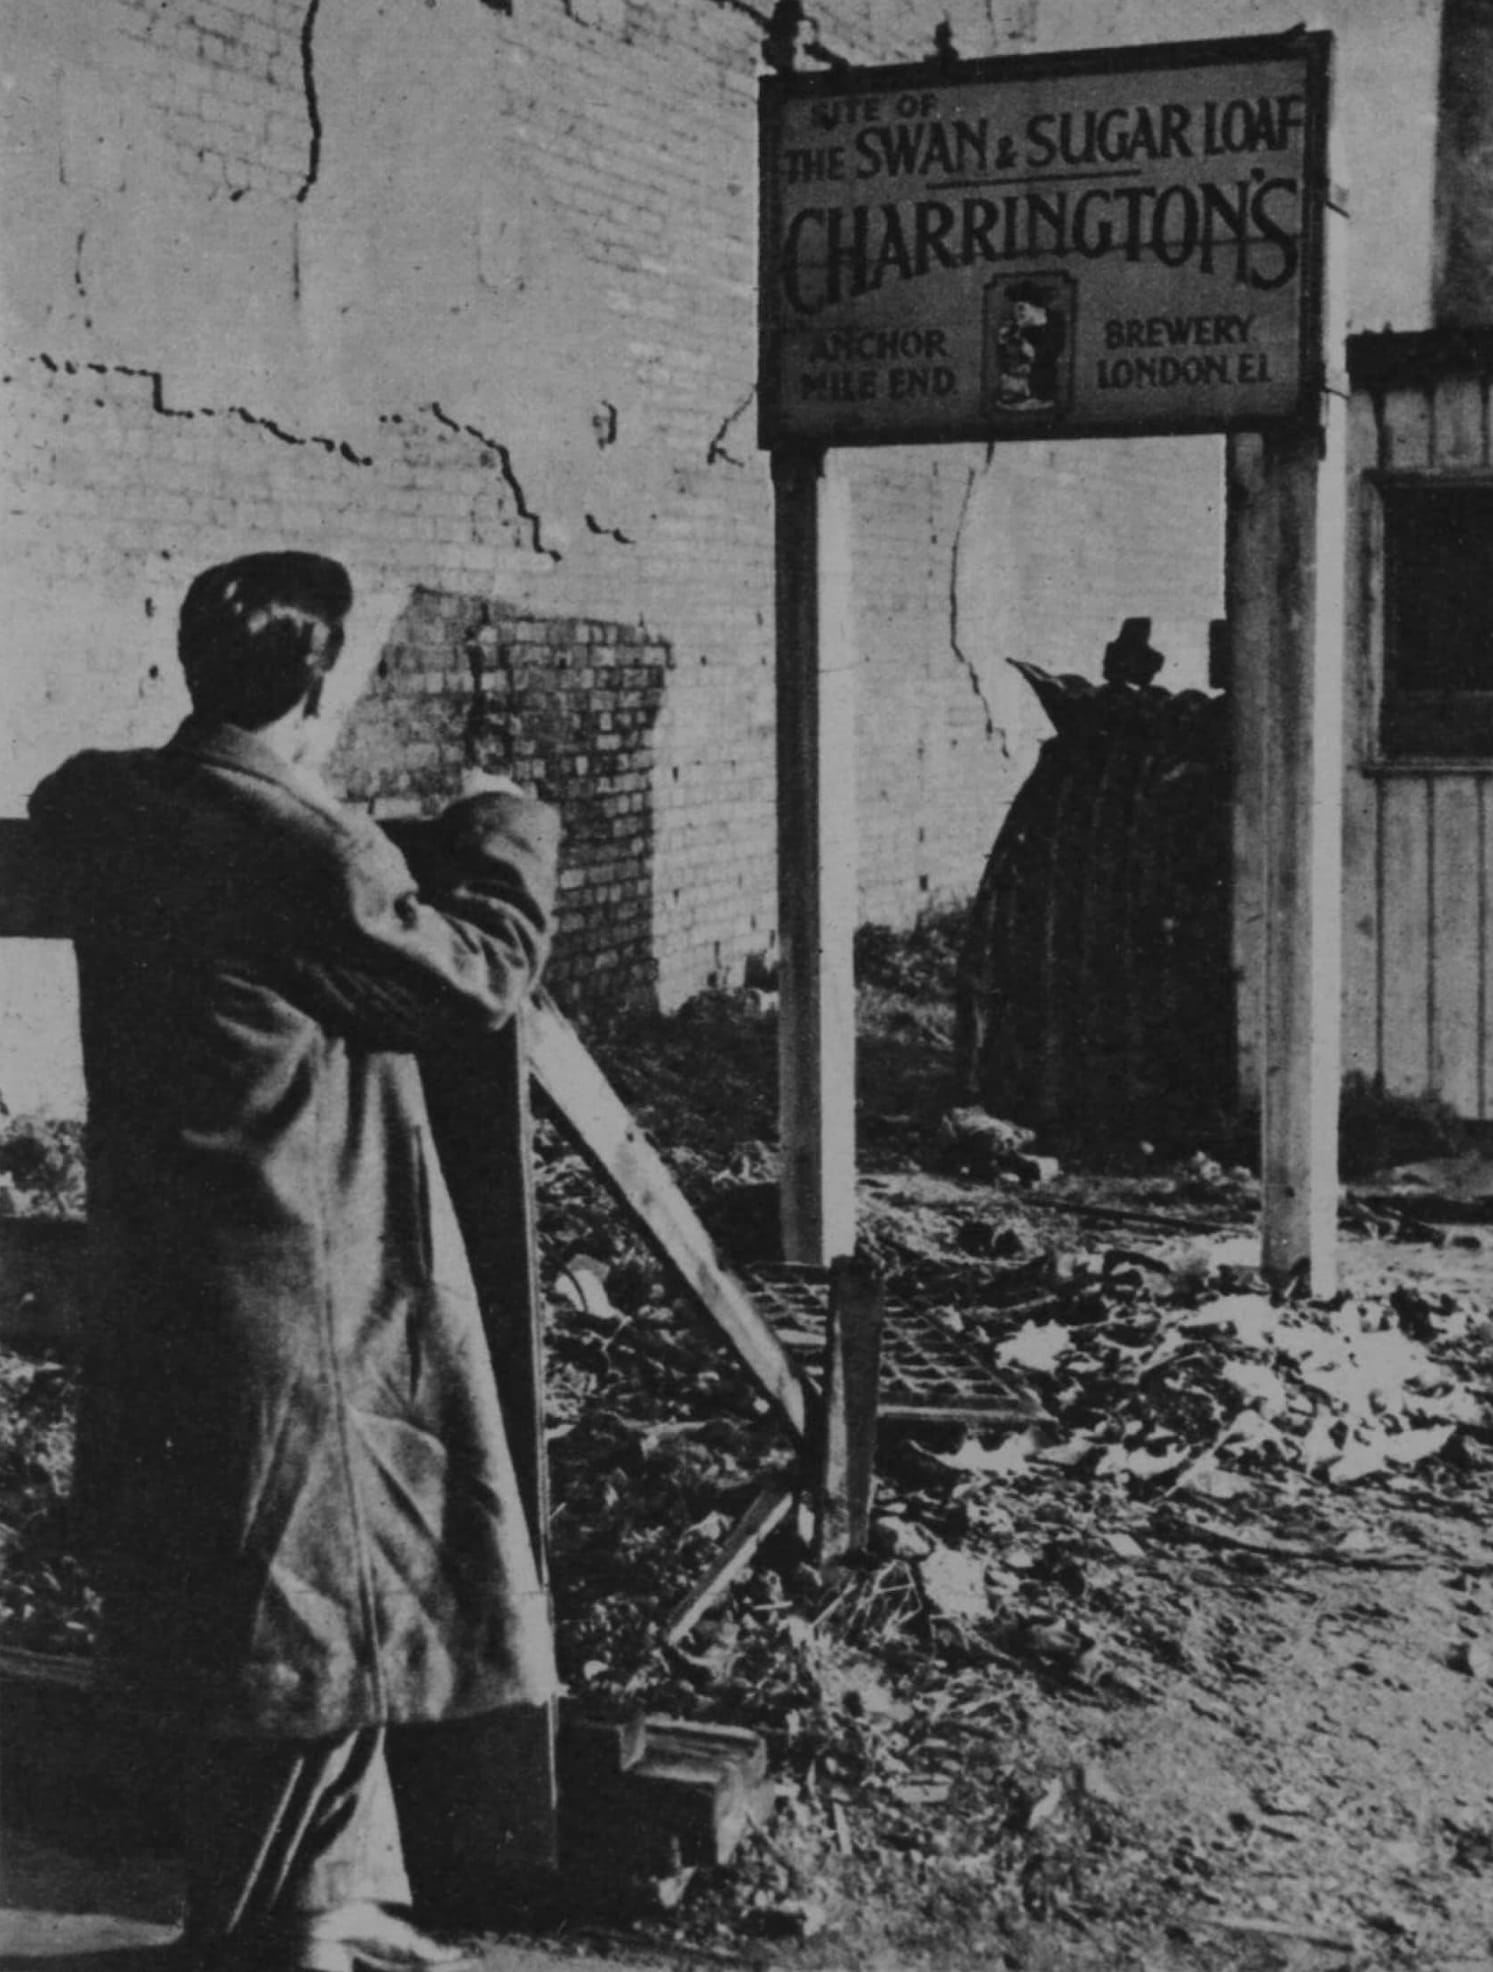 In front of a wall in a poor state of repair, there is an empty plot of land with debris strewn across it. A man is seen from behind looking up at a sign mounted on two posts that reads, "Site of The Swan & Sugar Loaf. Charrington's, Anchor Brewery, Mile End, London E1."